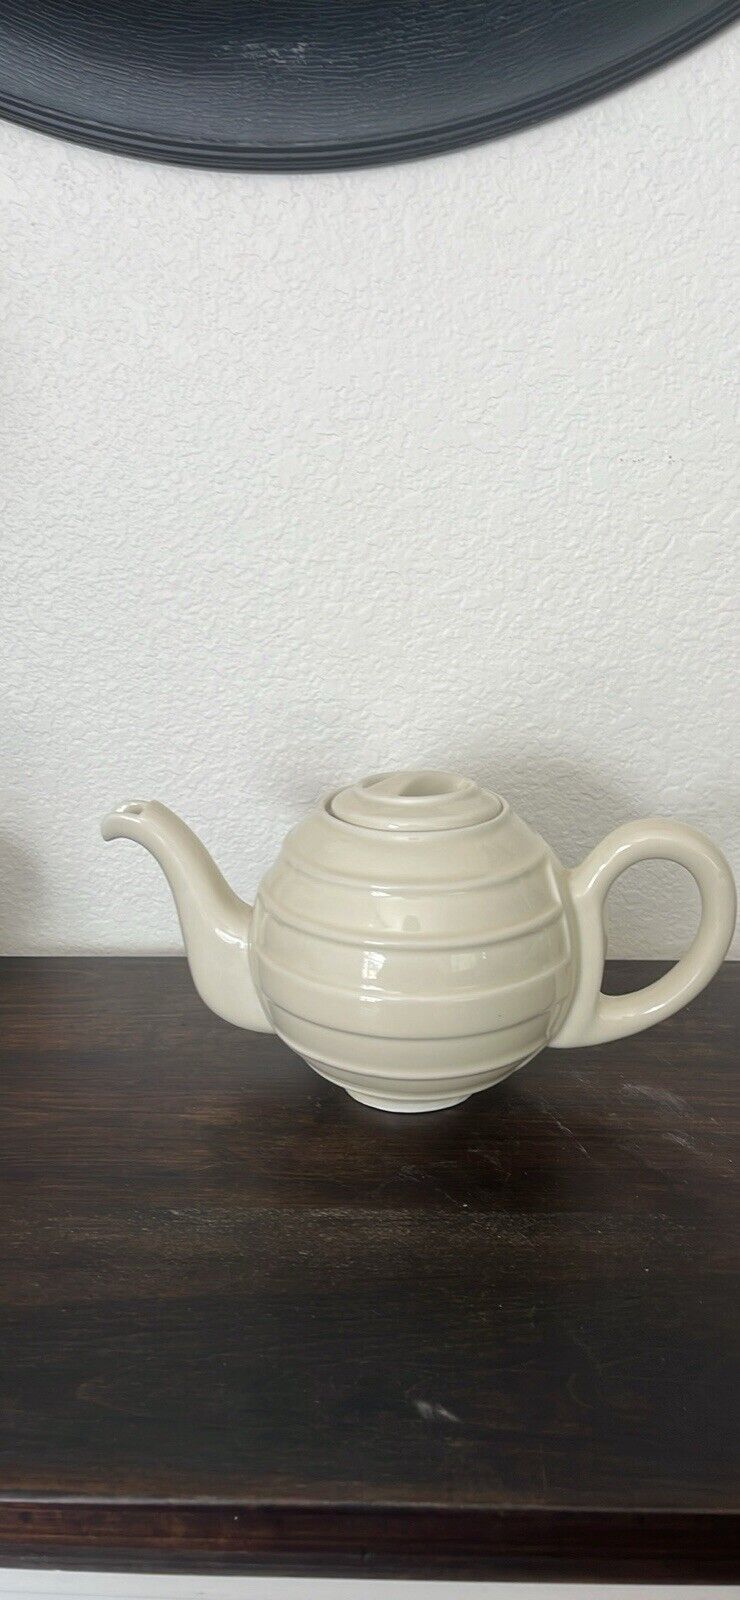 Vintage 1930's German Art Deco Teapot With Thermal Cover Cozy